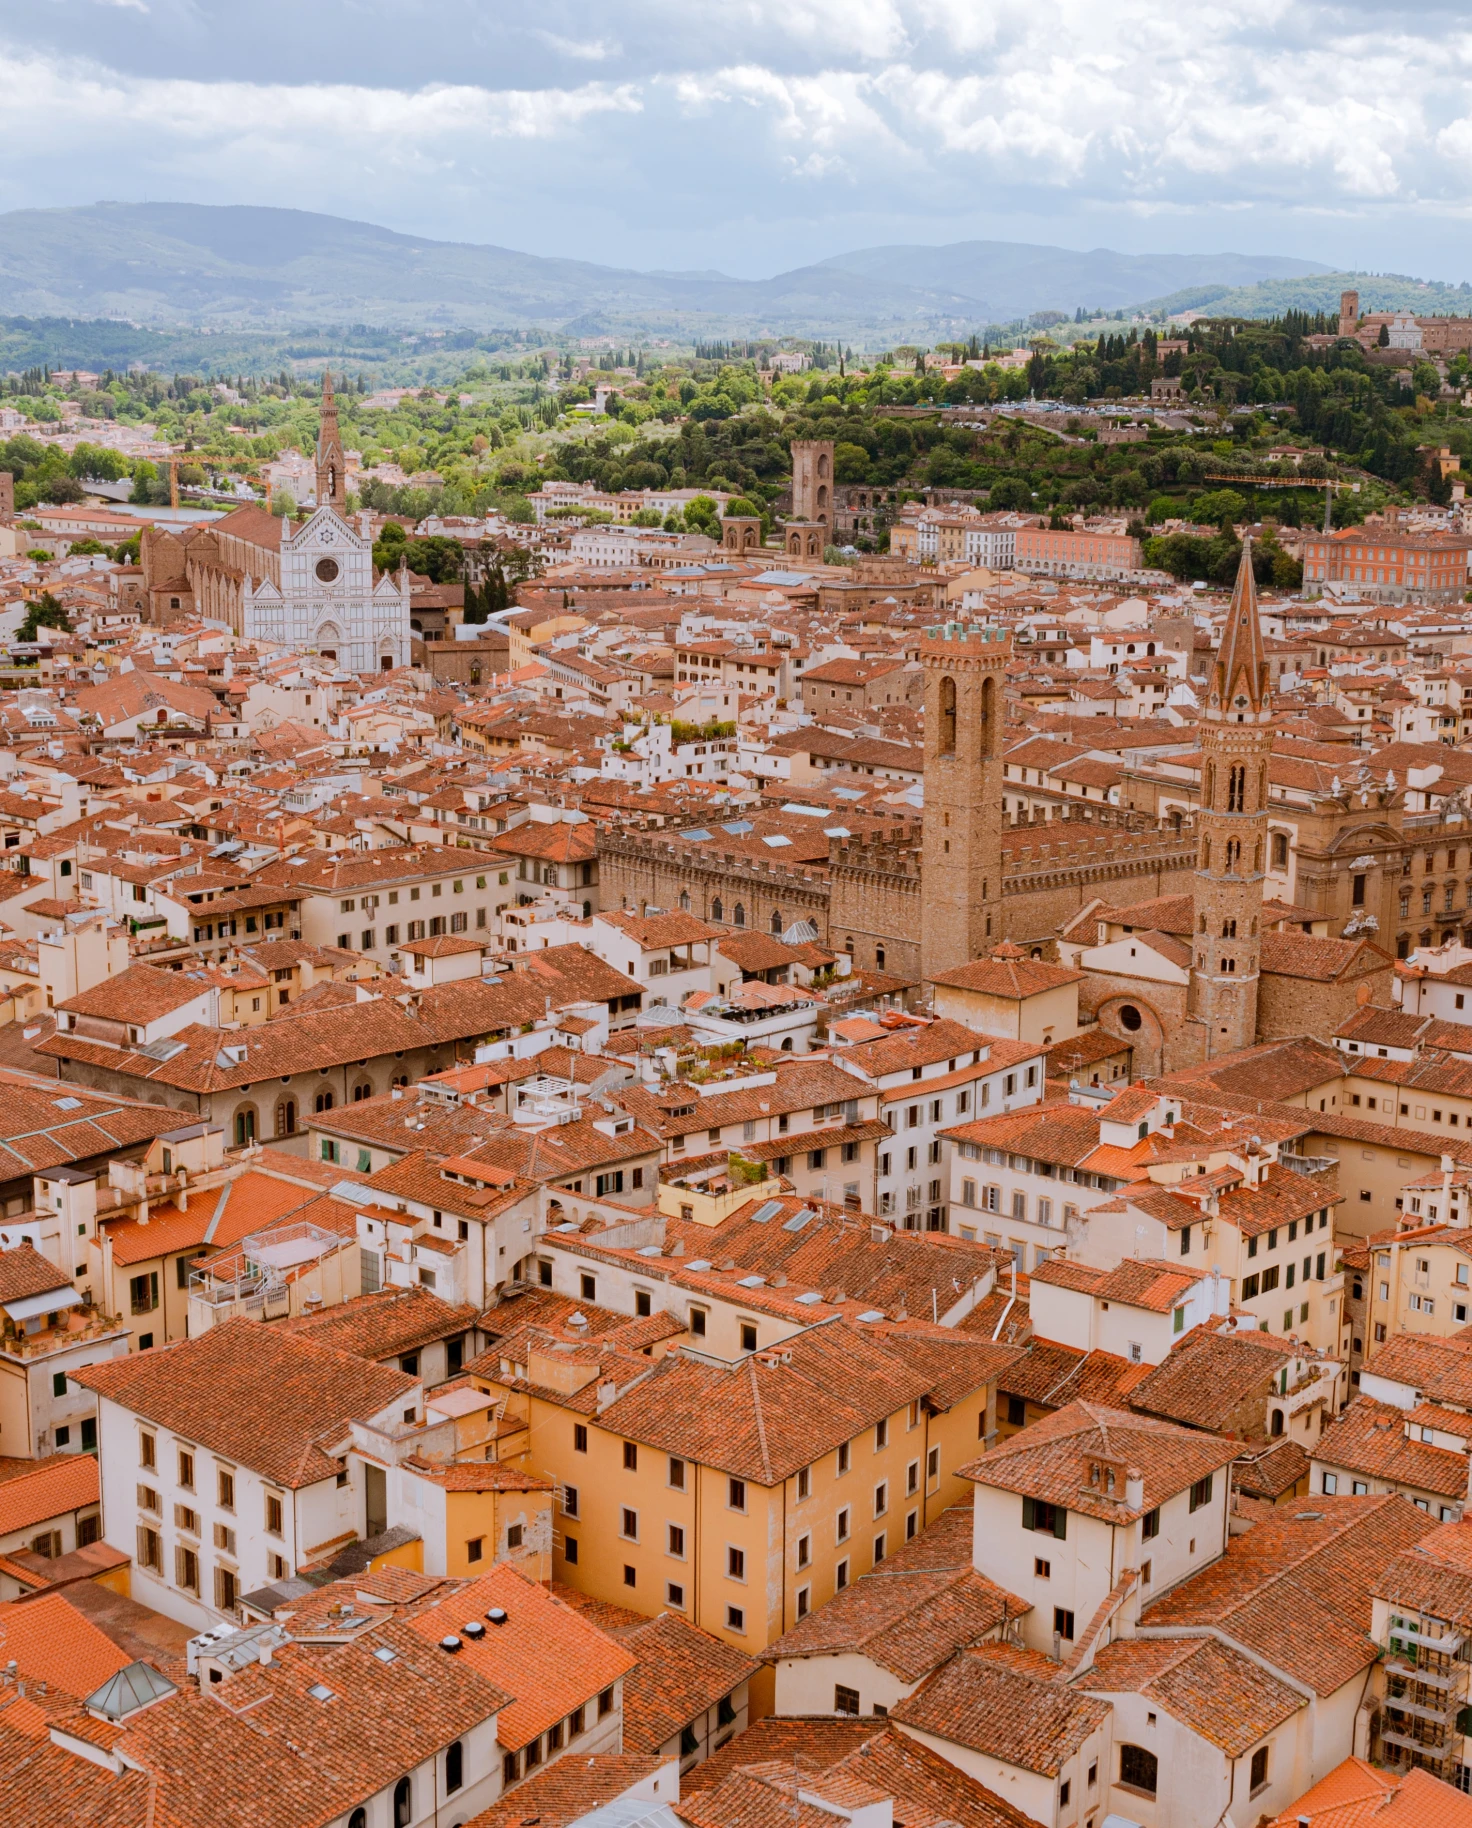 Aerial views of an Italian town and countryside.